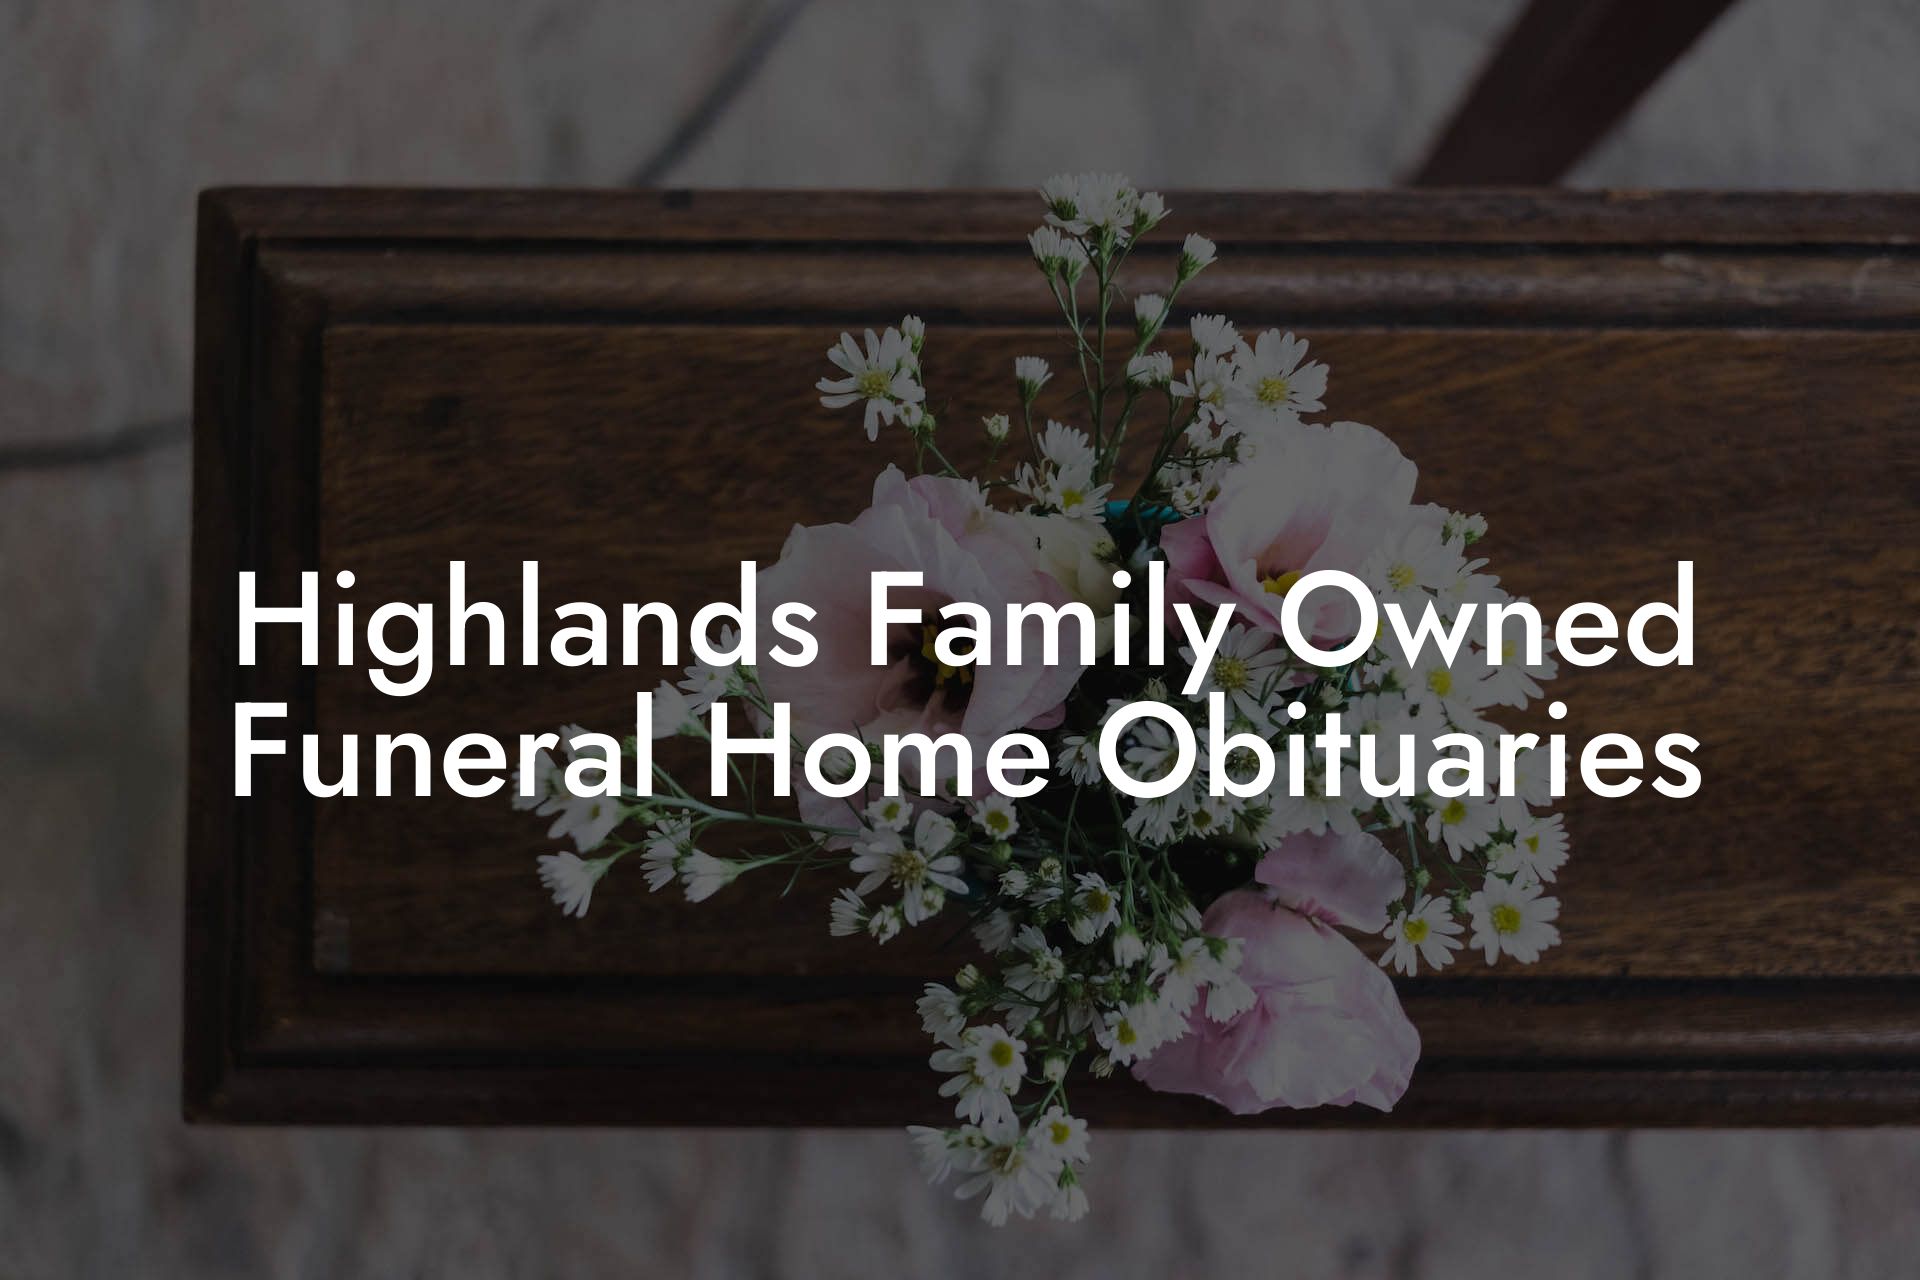 Highlands Family Owned Funeral Home Obituaries